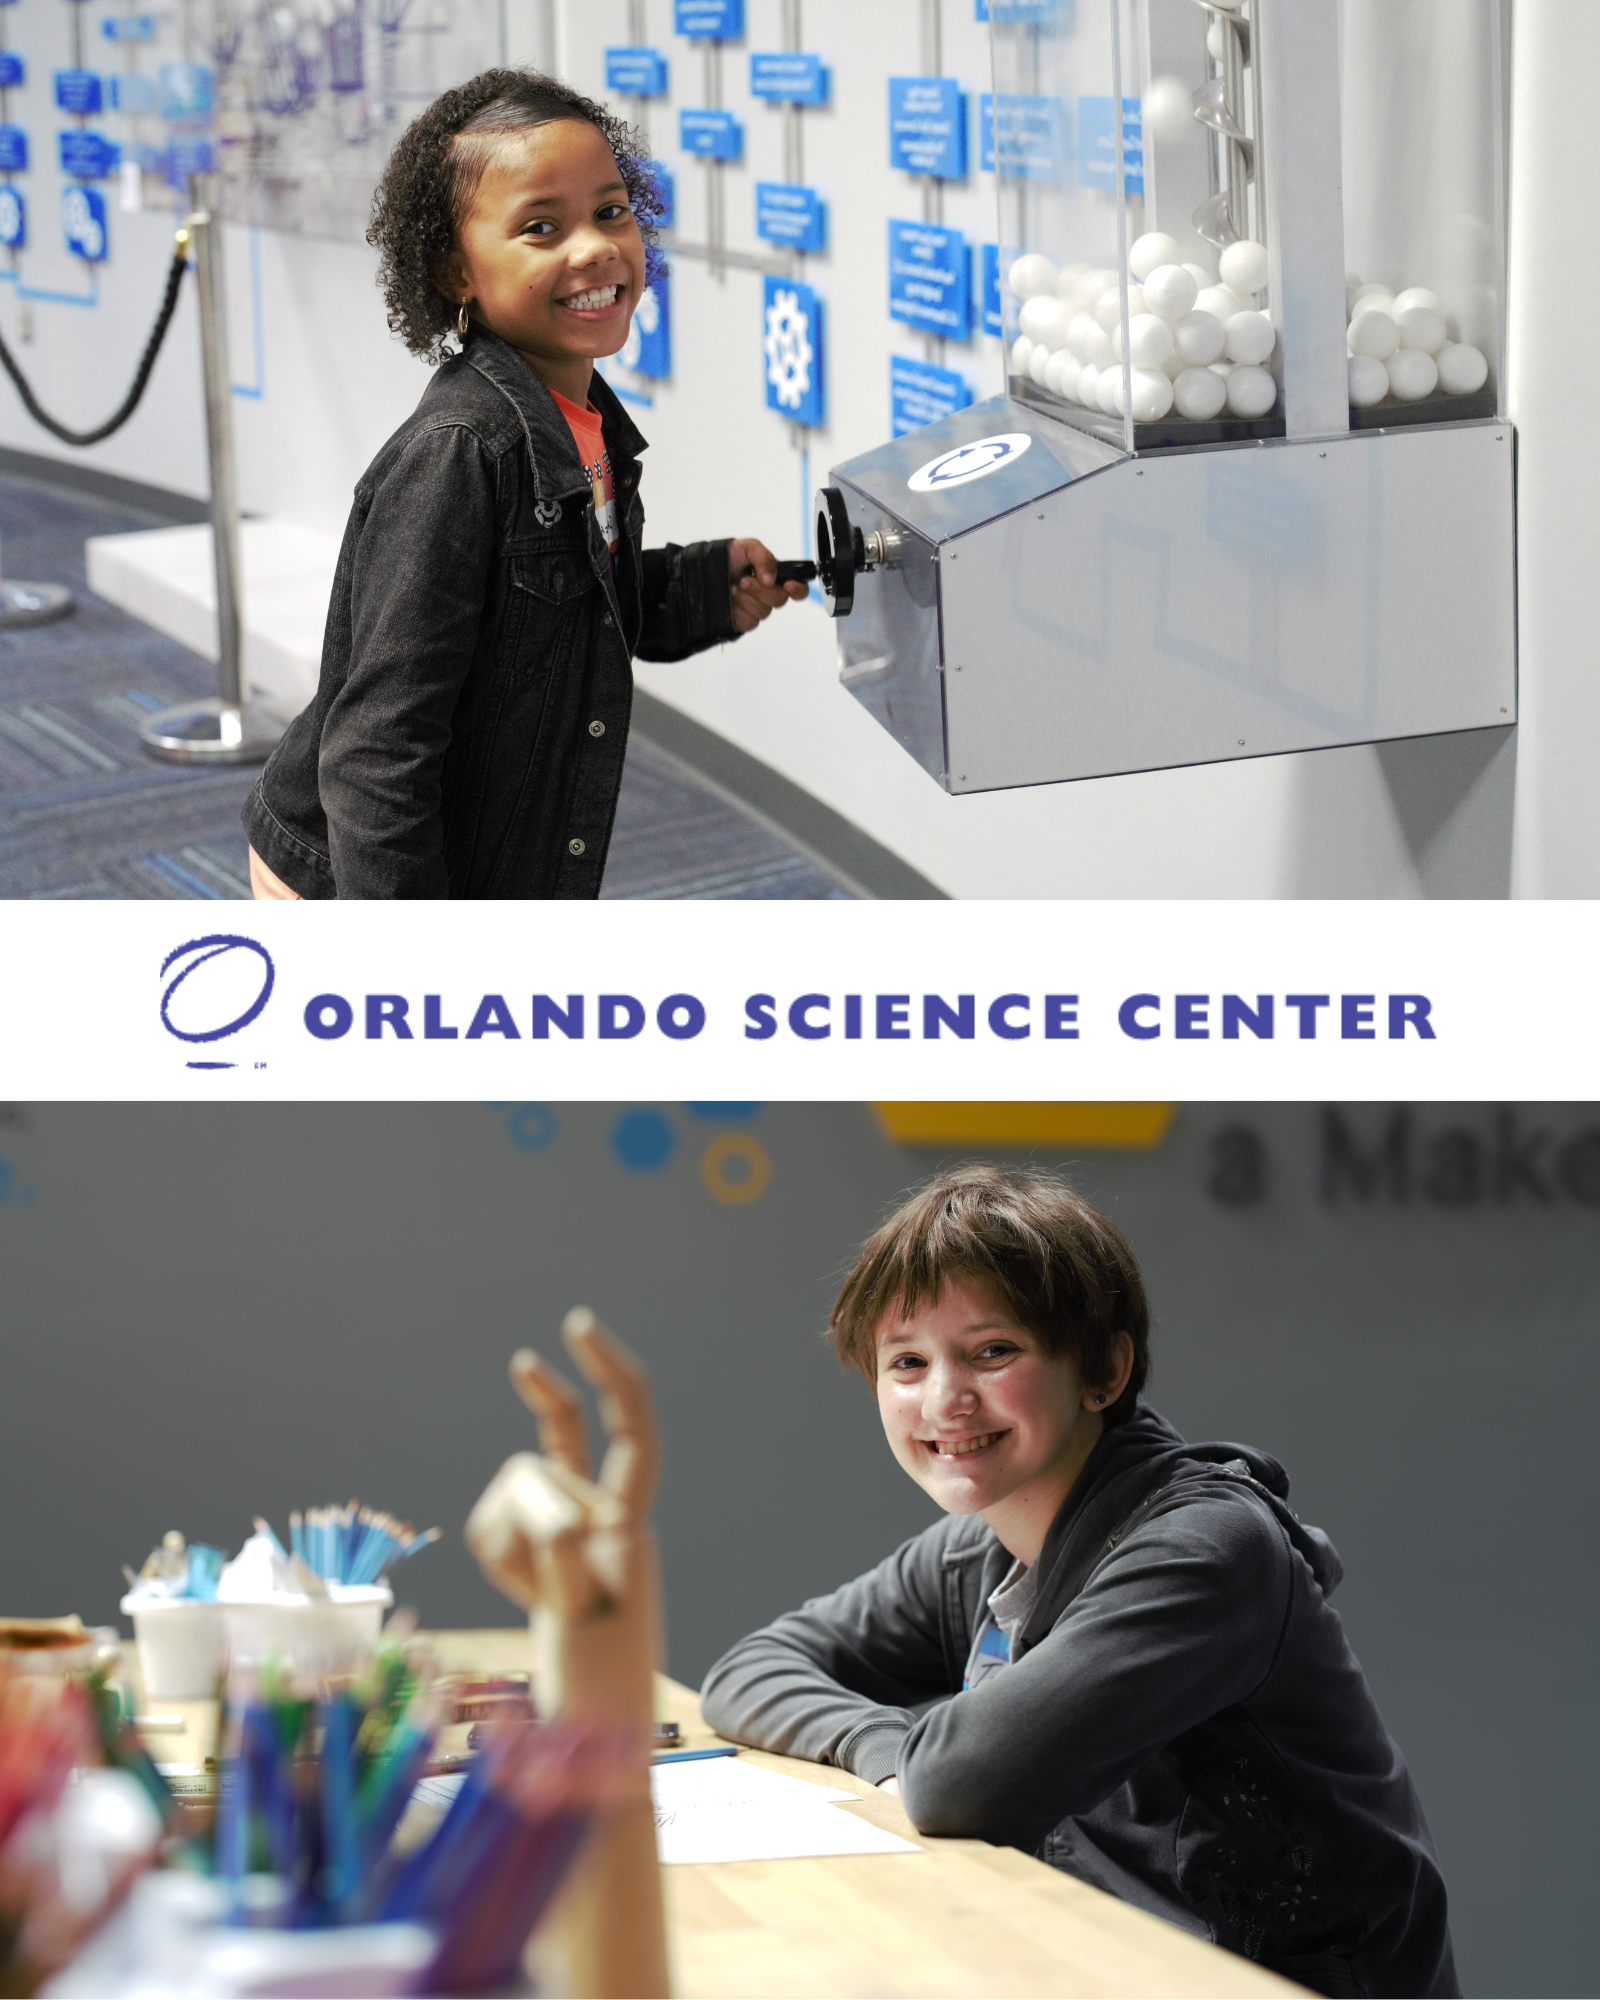 Kids engaging in STEM activities at the Orlando Science Center